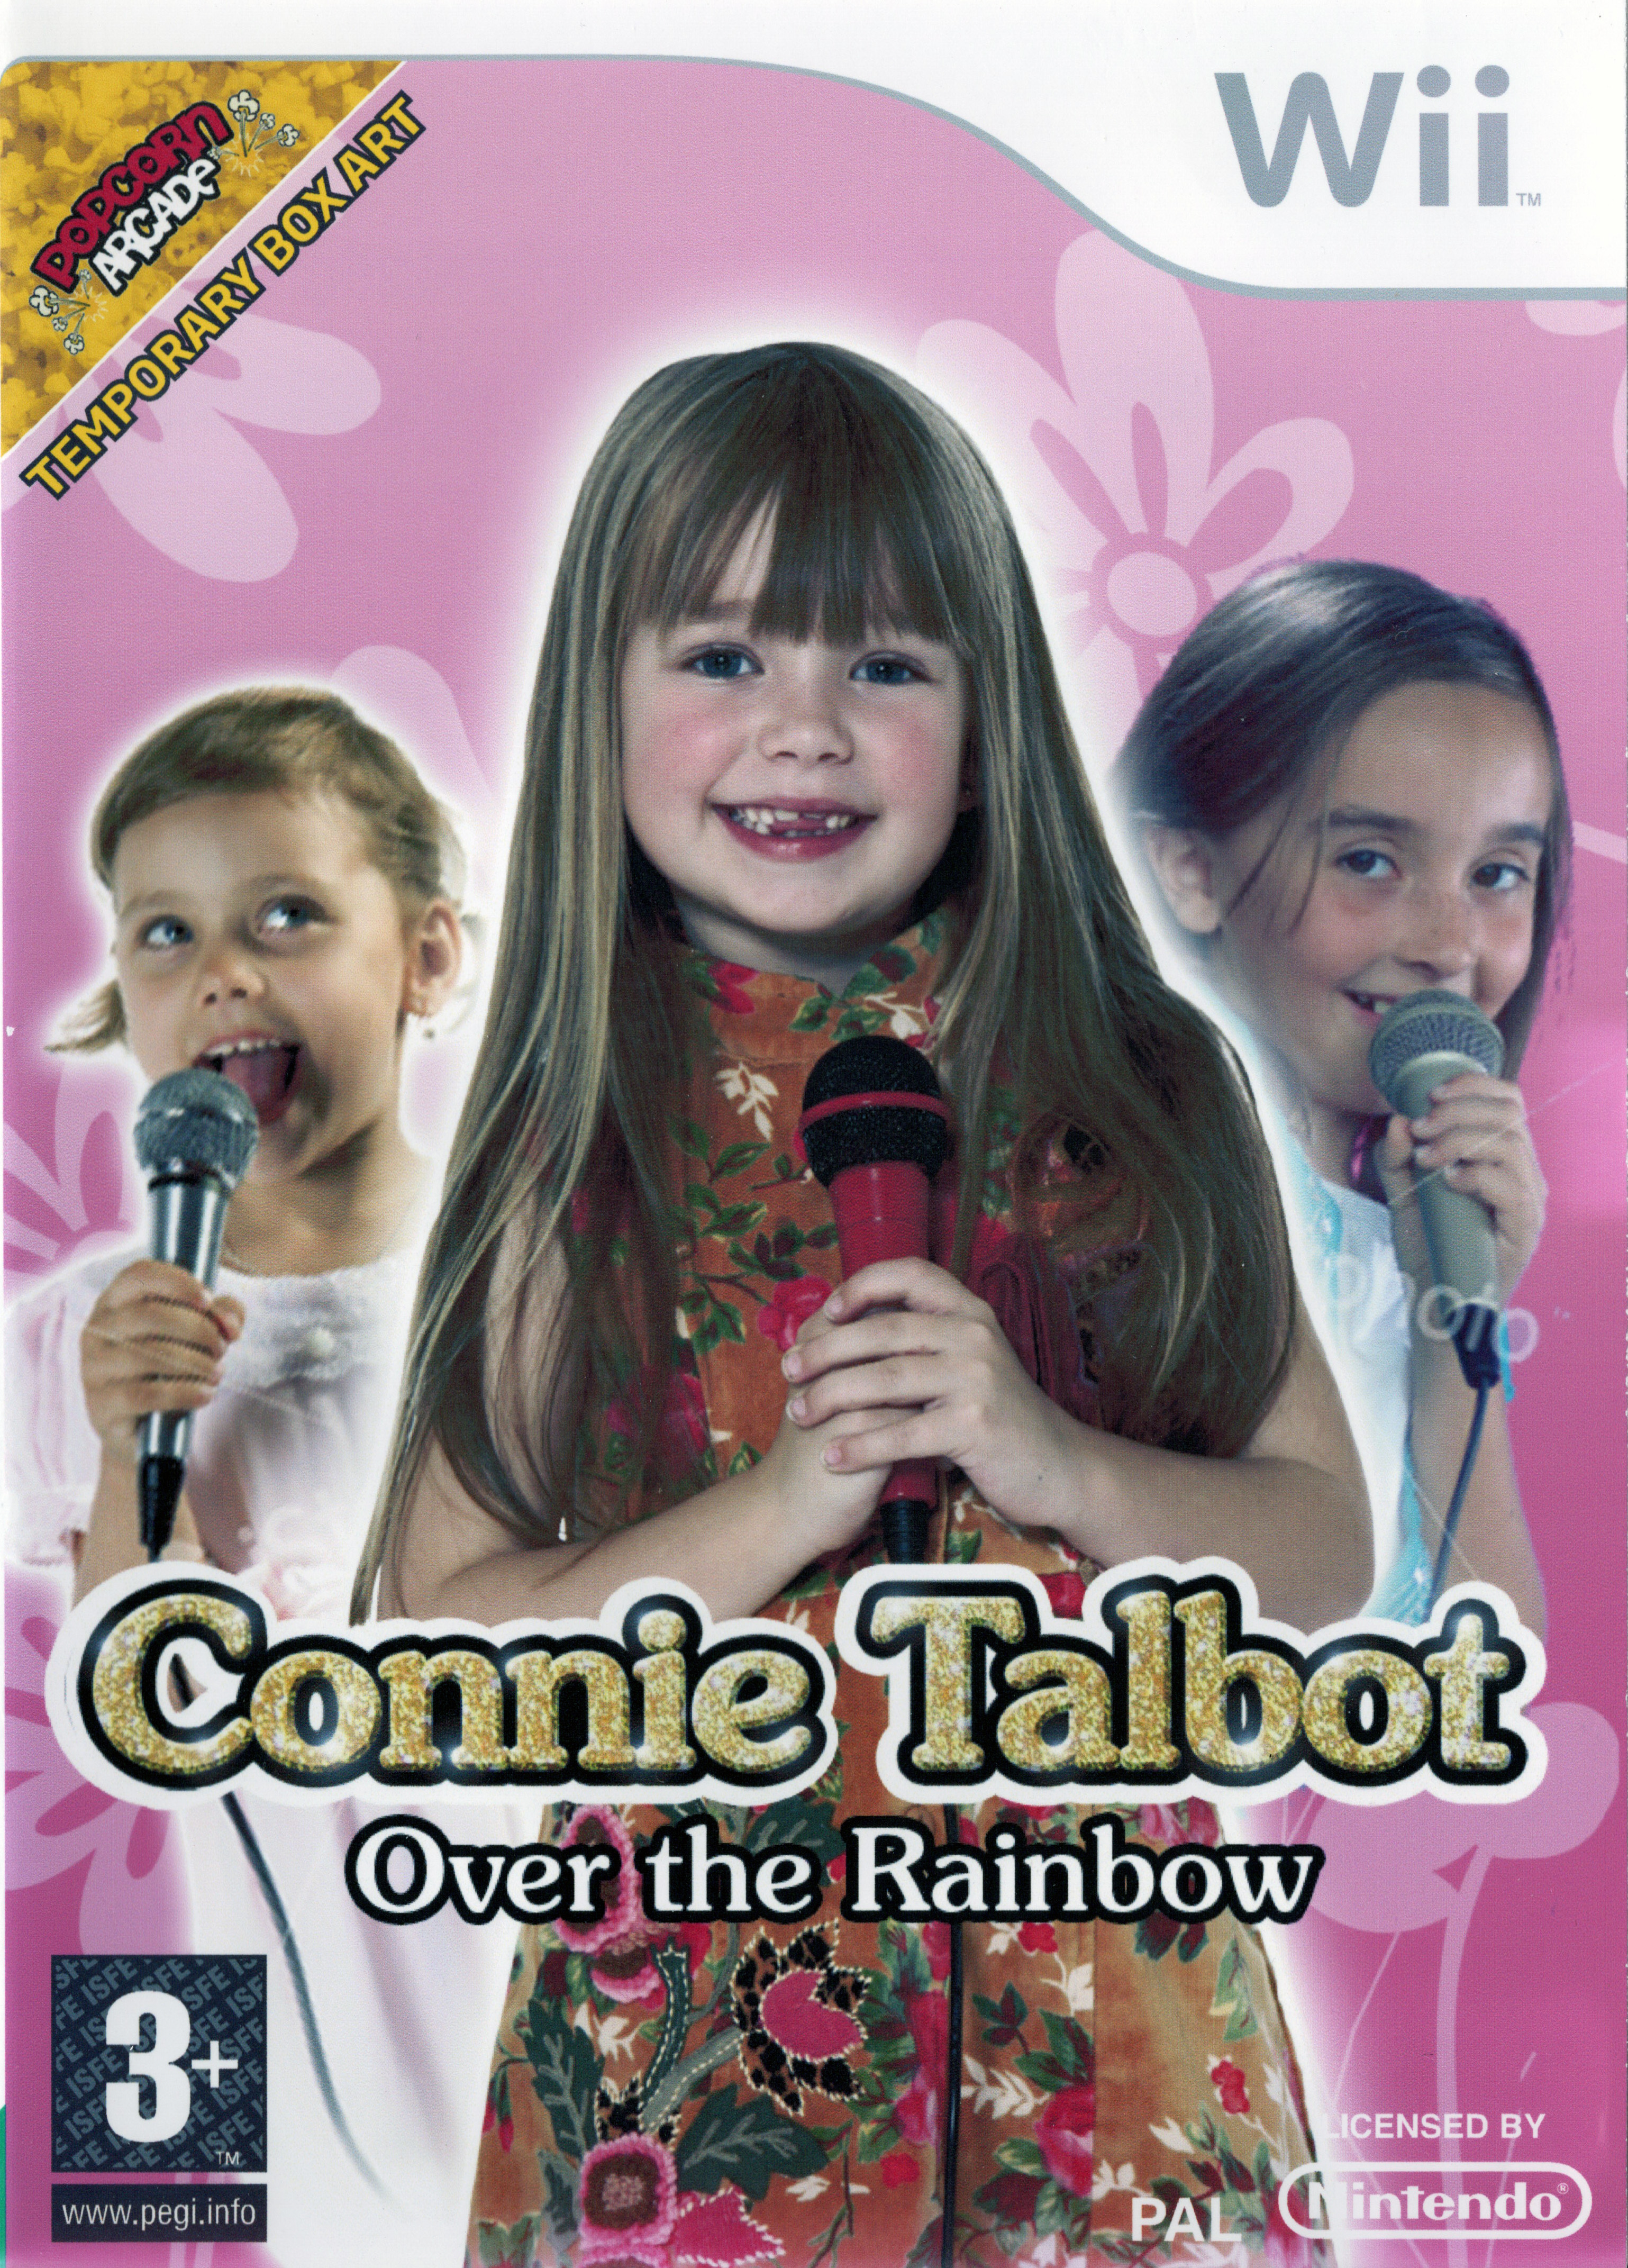 Connie Talbot Over the Rainbow Wii cover.jpg